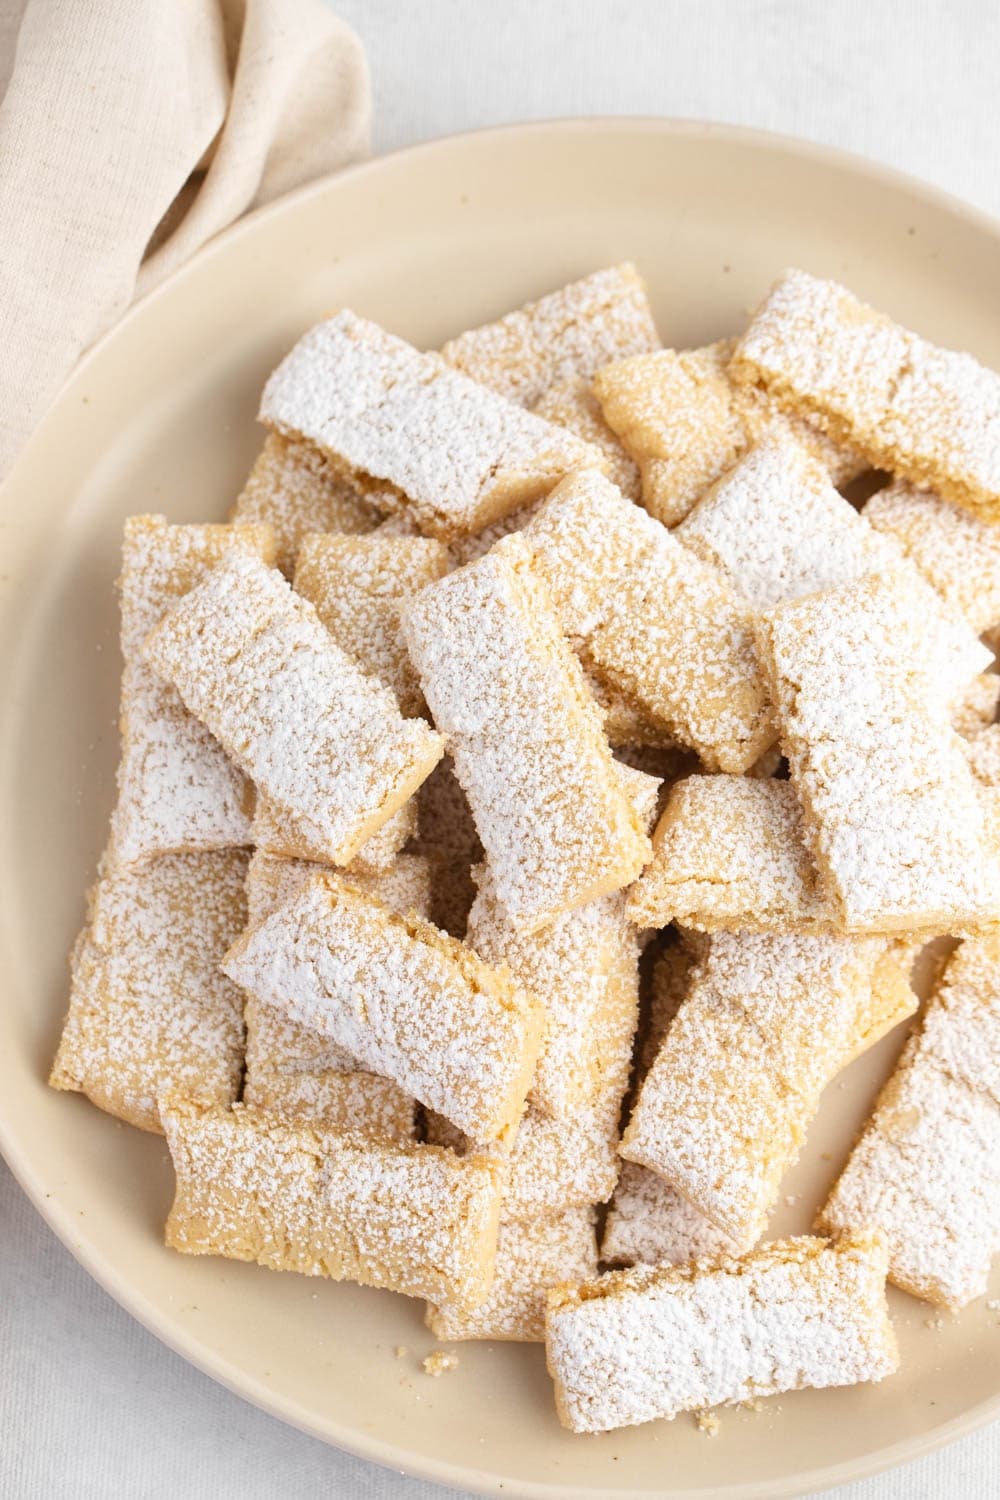 Homemade Swedish butter cookies sprinkled with confectionary sugar.